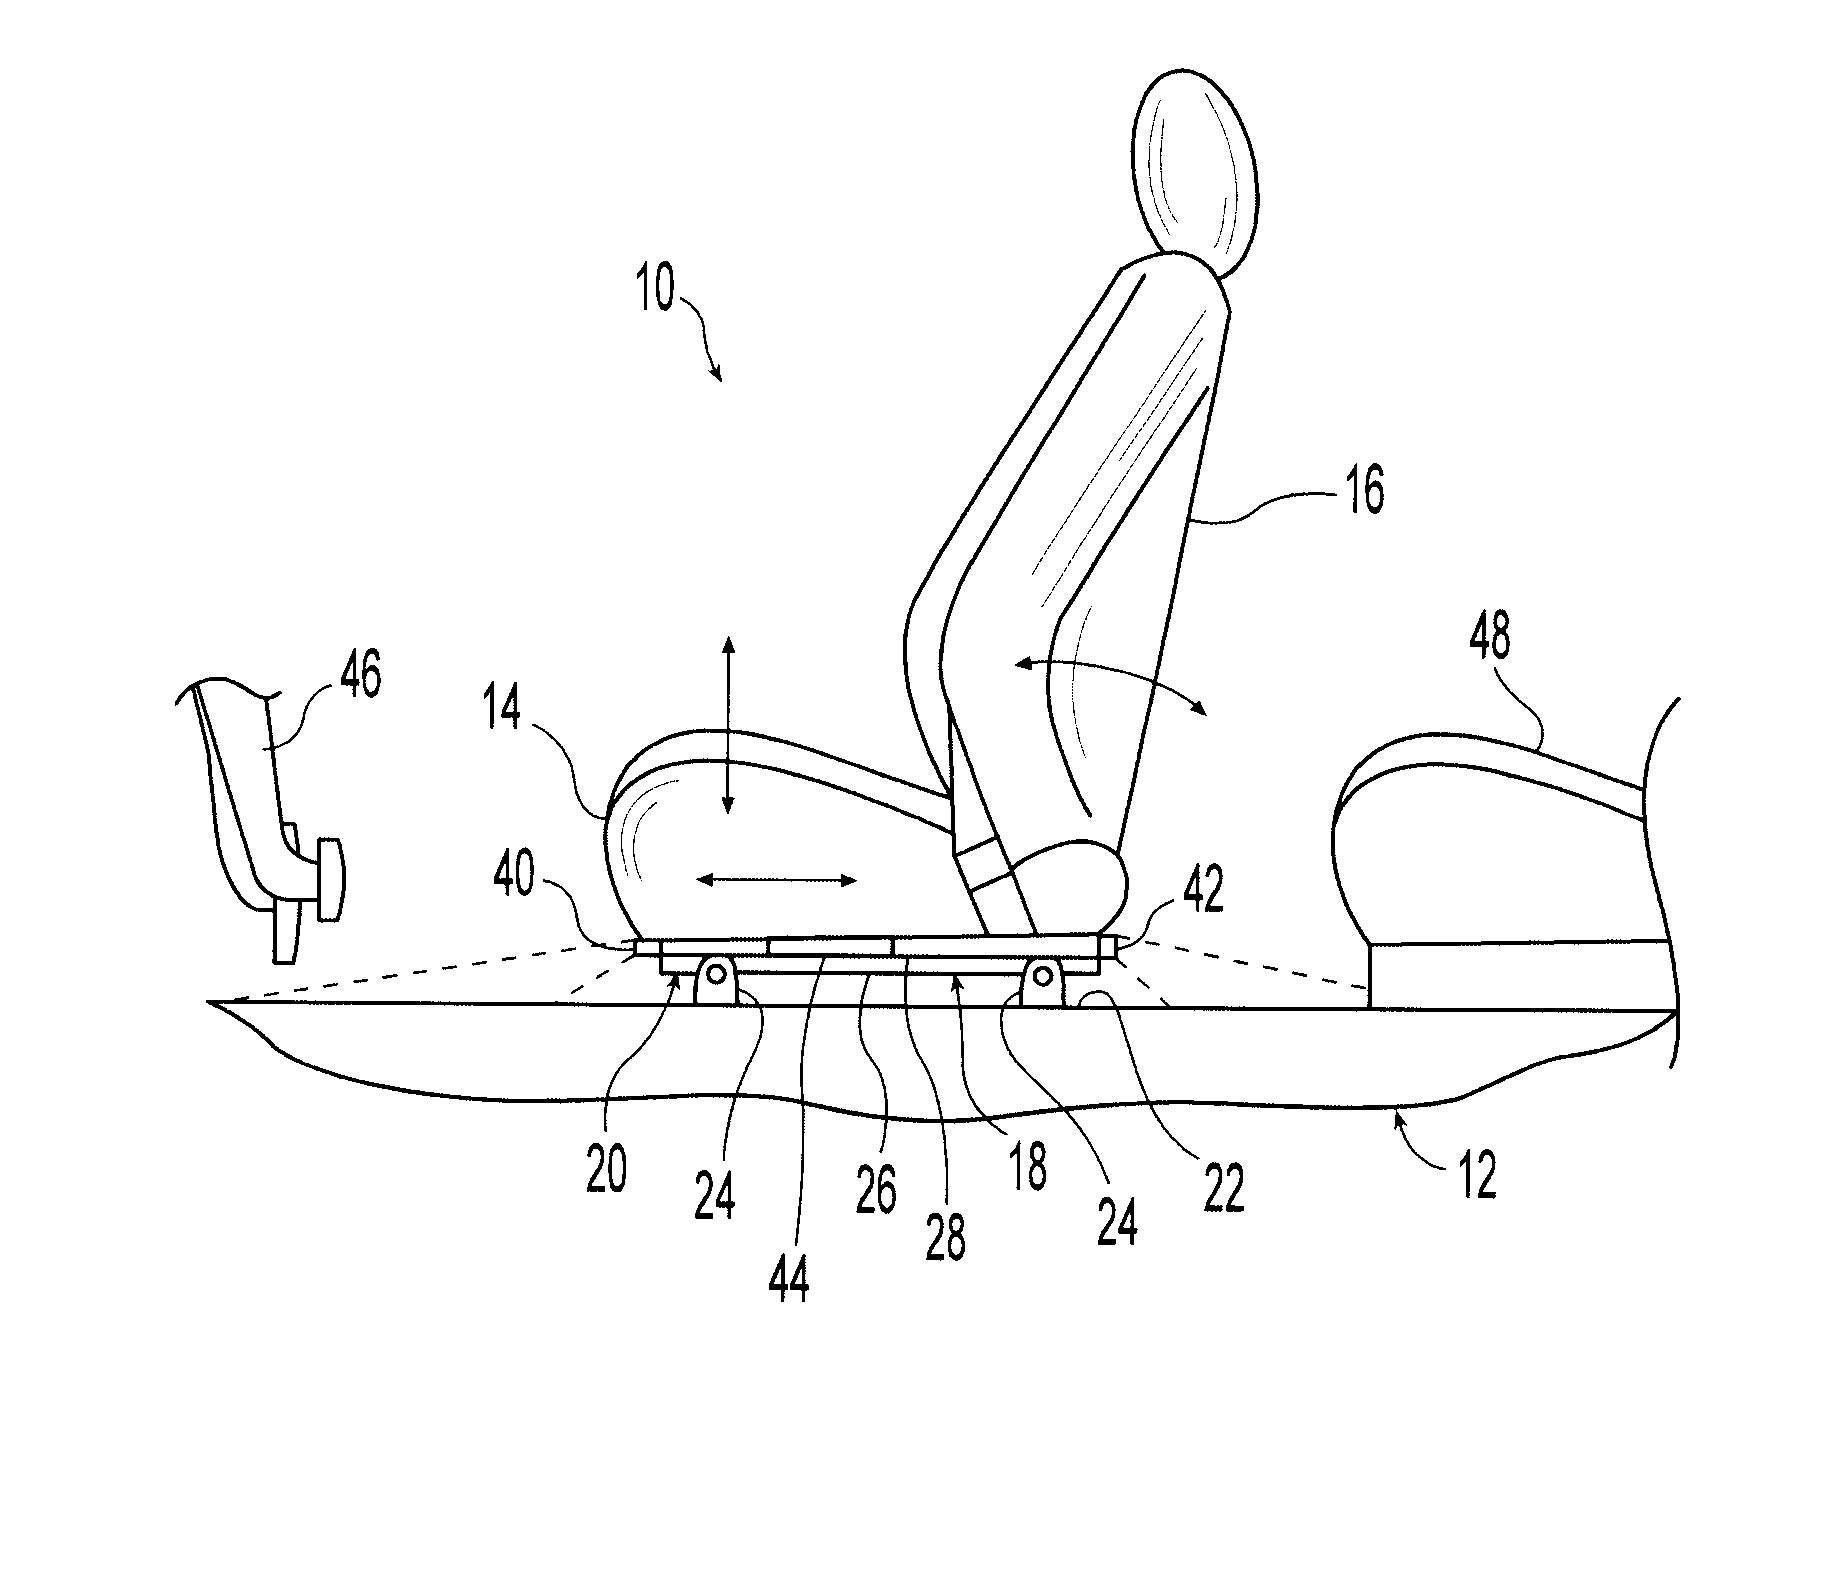 Integrated under-seat interior lighting for a motor vehicle seat